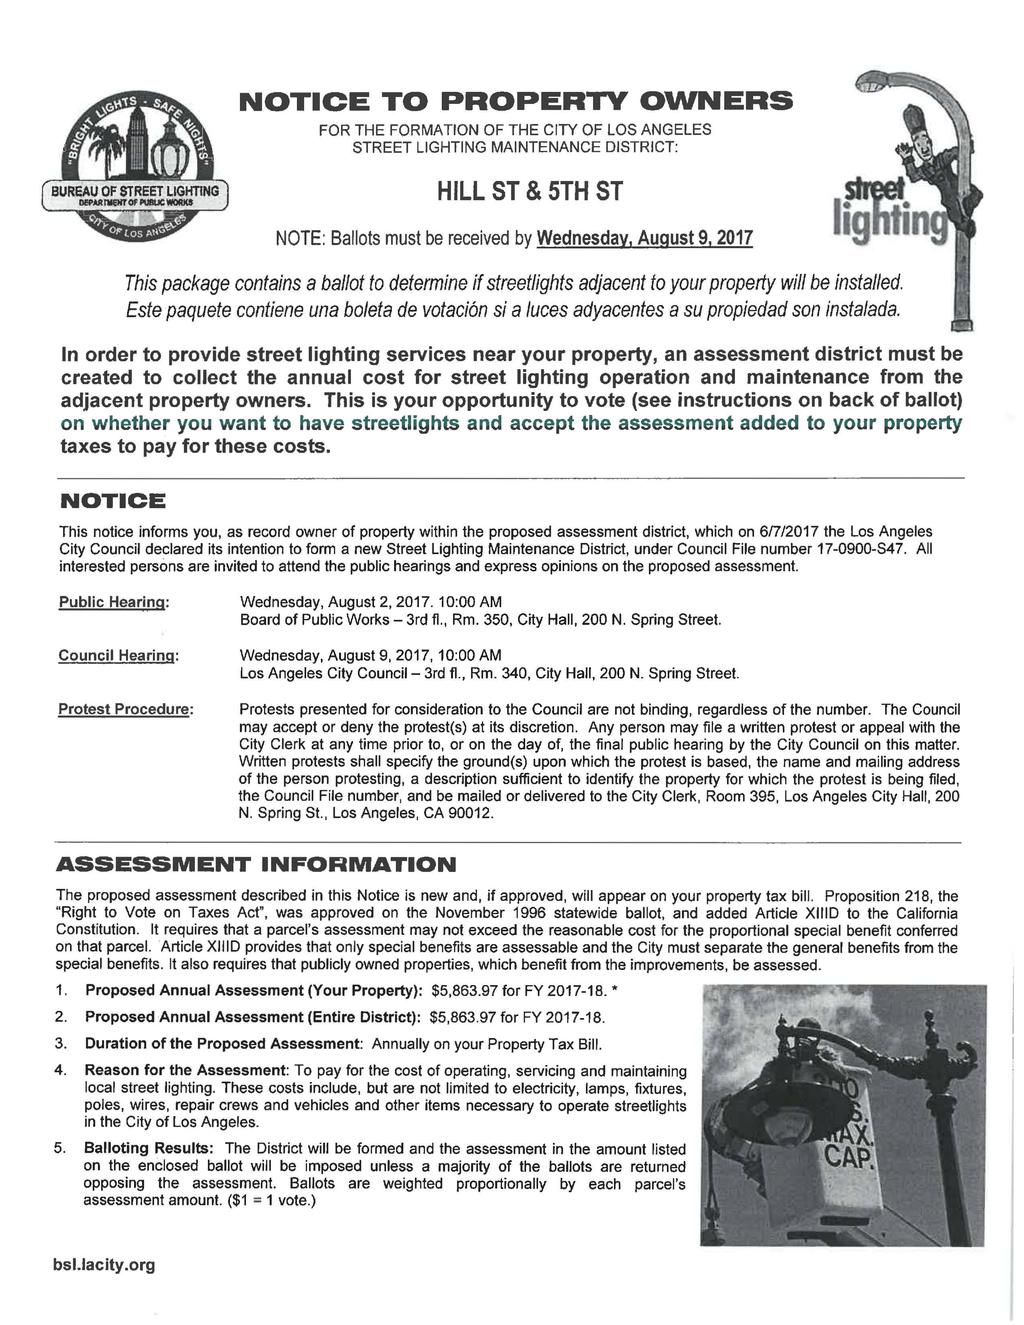 NOTICE TO PROPERTY OWNERS FOR THE FORMATION OF THE CITY OF LOS ANGELES STREET LIGHTING MAINTENANCE DISTRICT: 1 BUREAU OF STREET LIGHTING DEPARTMENT Of WSUCWOftK* I HILL ST & 5TH ST ligffin NOTE: